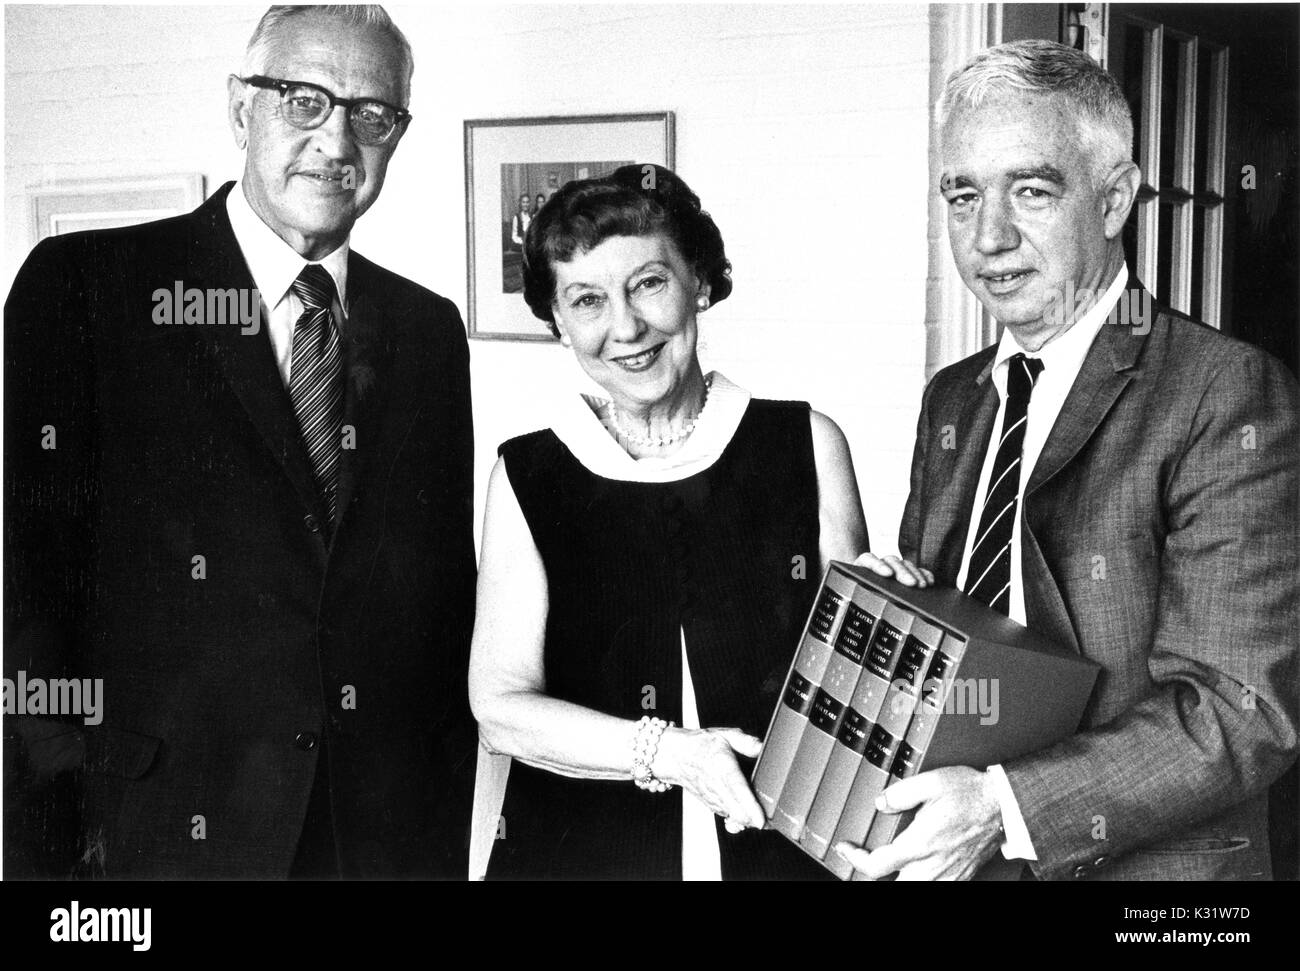 Former First Lady of the United States Mamie Doud Eisenhower (center) and director of the Johns Hopkins University Press Harold Ingle (left), standing next to Alfred DuPont Chandler, professor of business history at Hopkins, in Baltimore, Maryland, 1970. Stock Photo